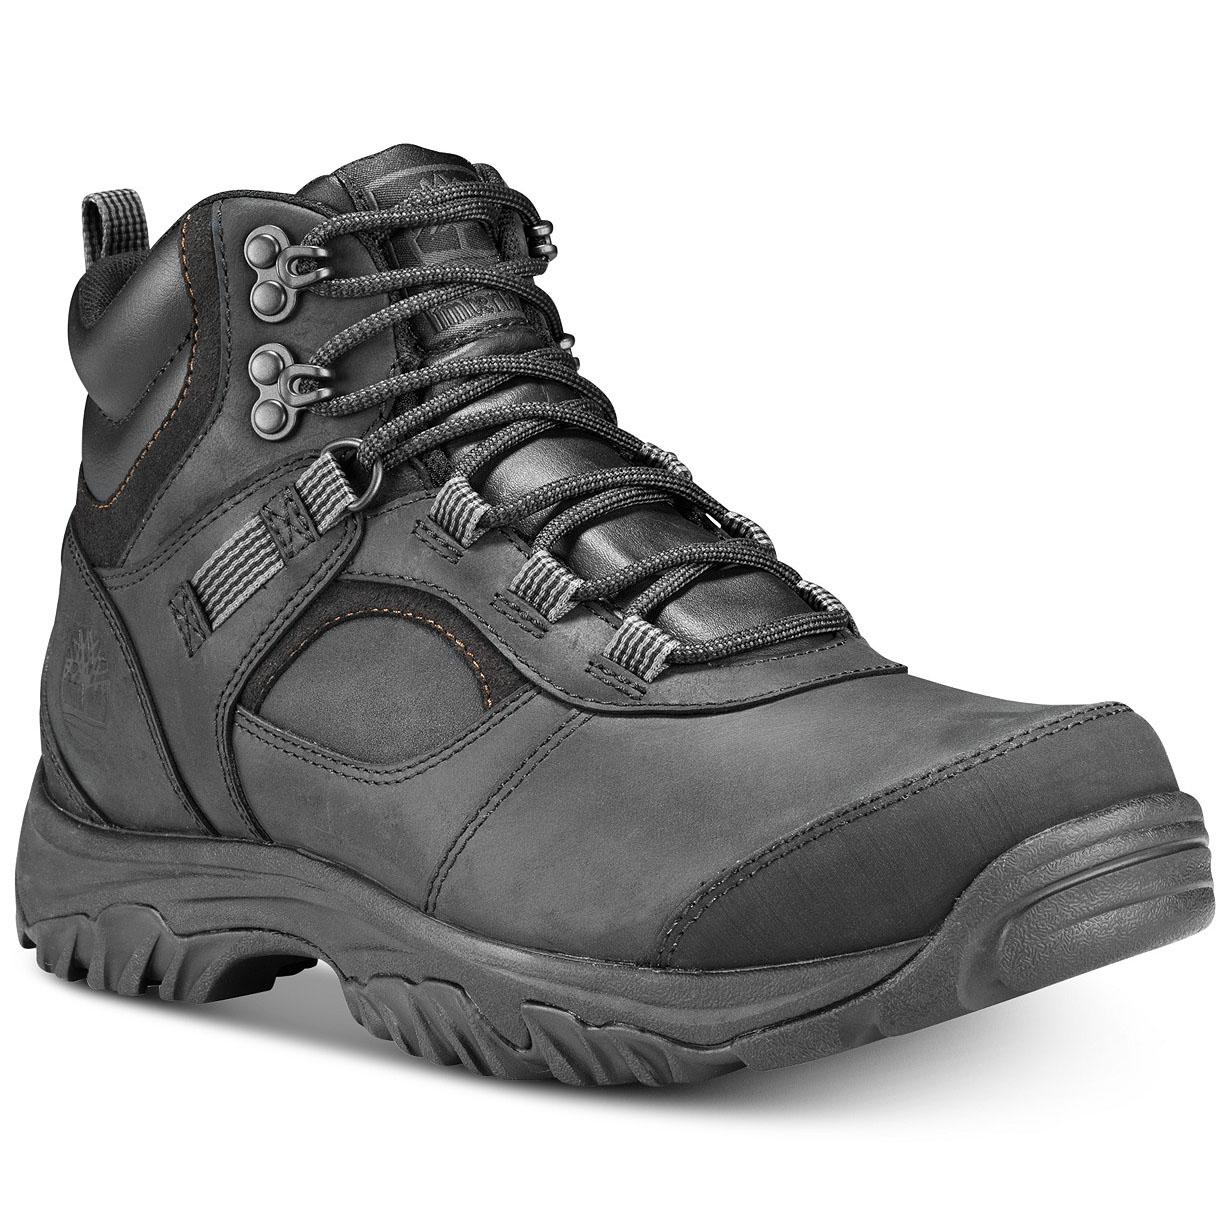 Timberland Mens Mt Major Hiking Boots for $56.99 Shipped